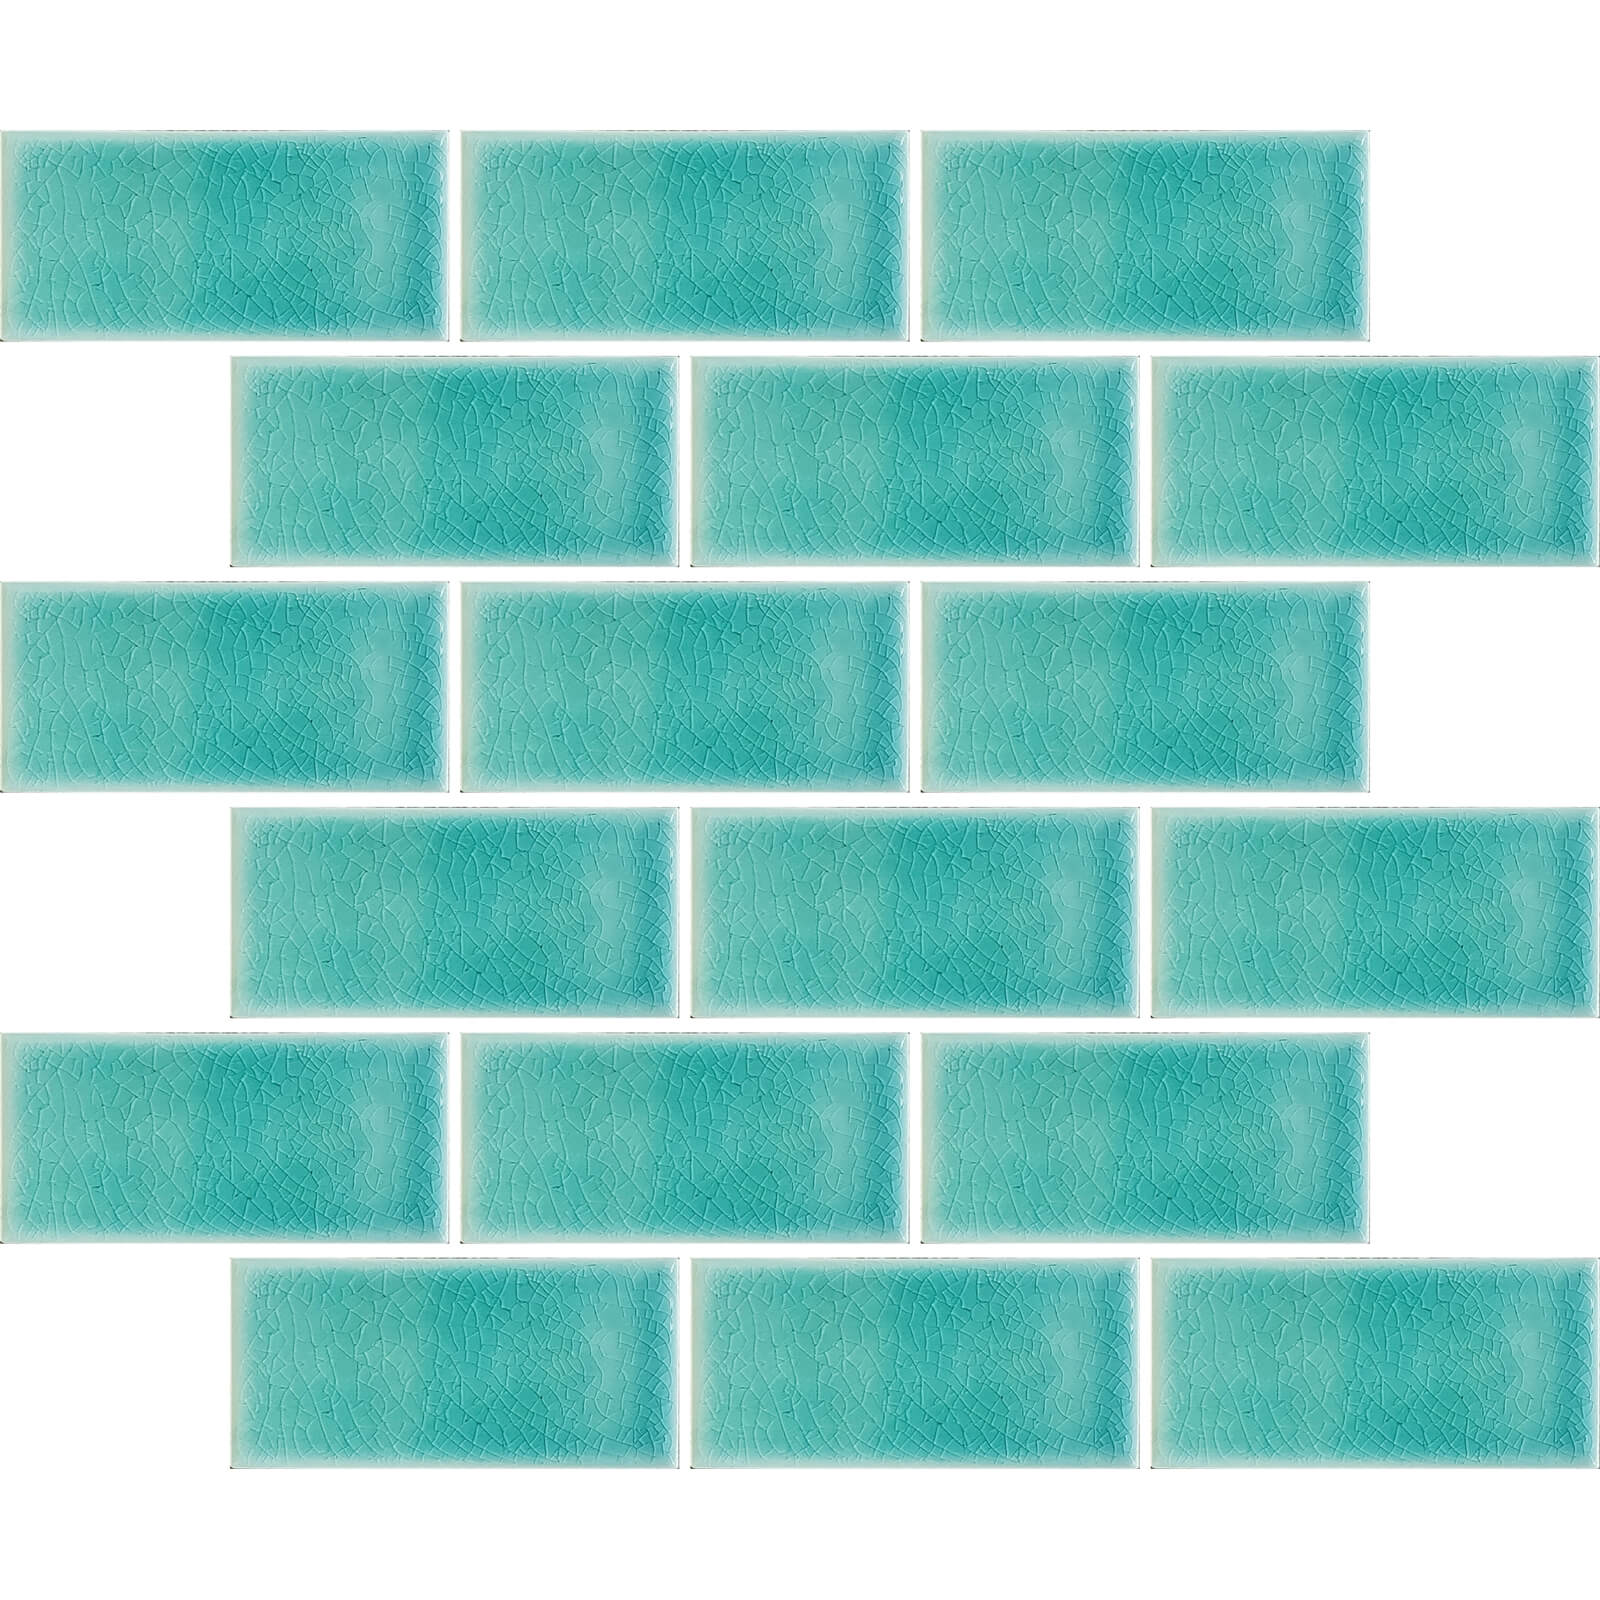 House of Mosaics Teal Crackle Midi Metro Mosaic Tile (Sample Only) - 150 x 110mm